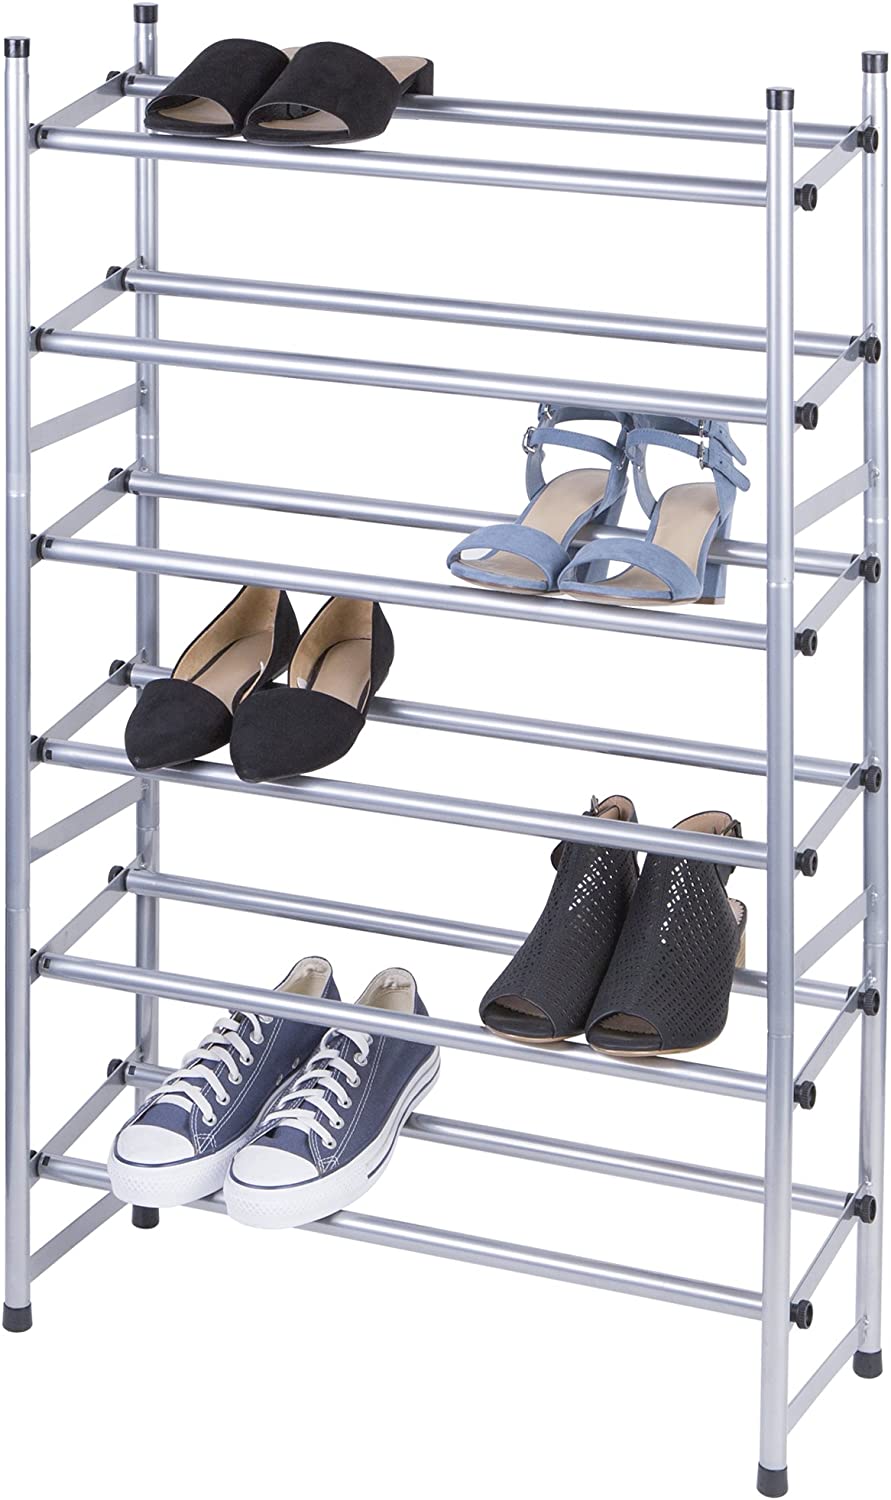 14 In. H X 44 In. W Expandable Space Saving 10-Pair Stainless Steel Shoe Rack